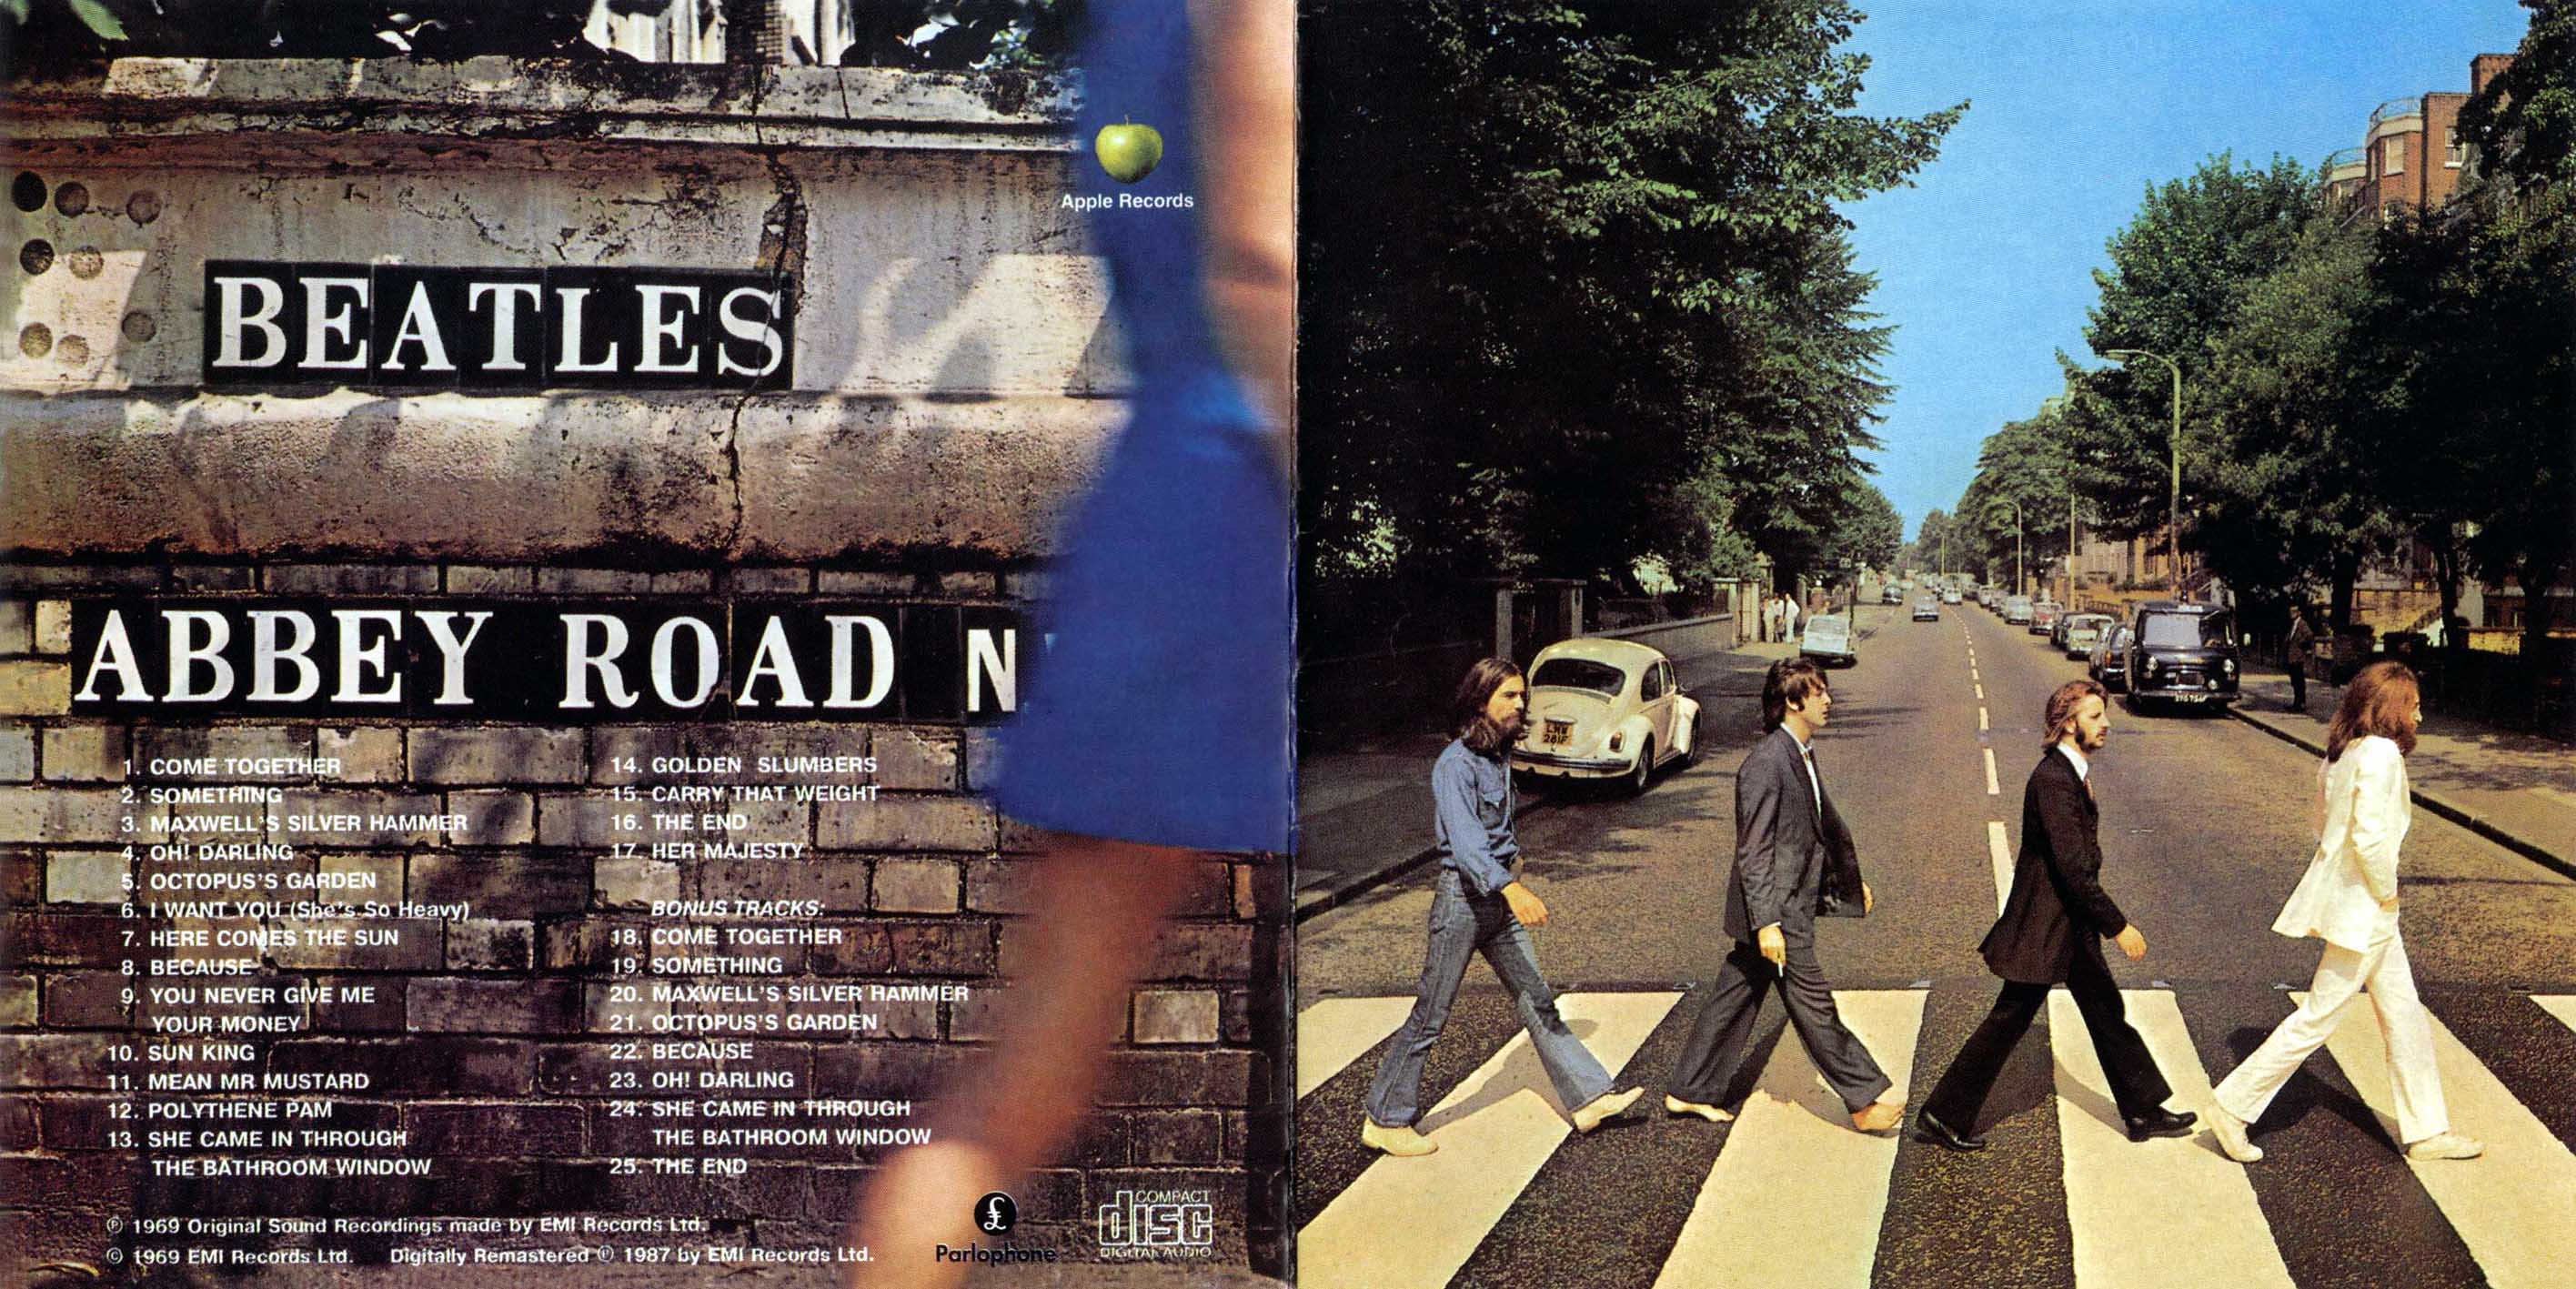 The Kooky Symbolism on the Beatles' 'Abbey Road' Album Cover